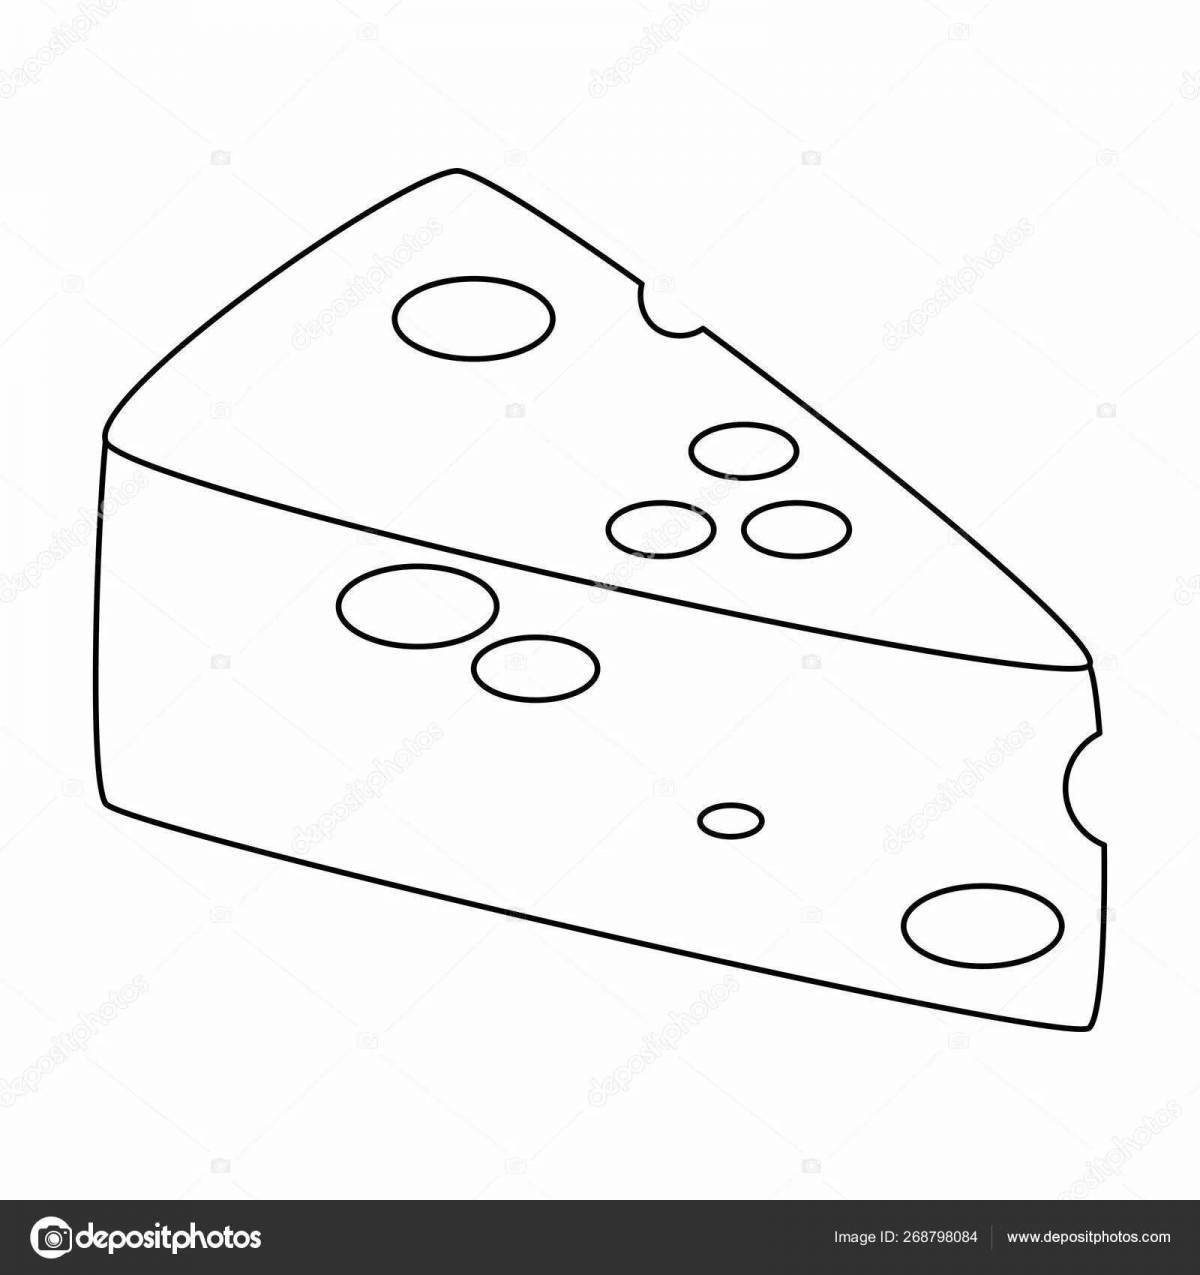 Coloring page amazing cheese